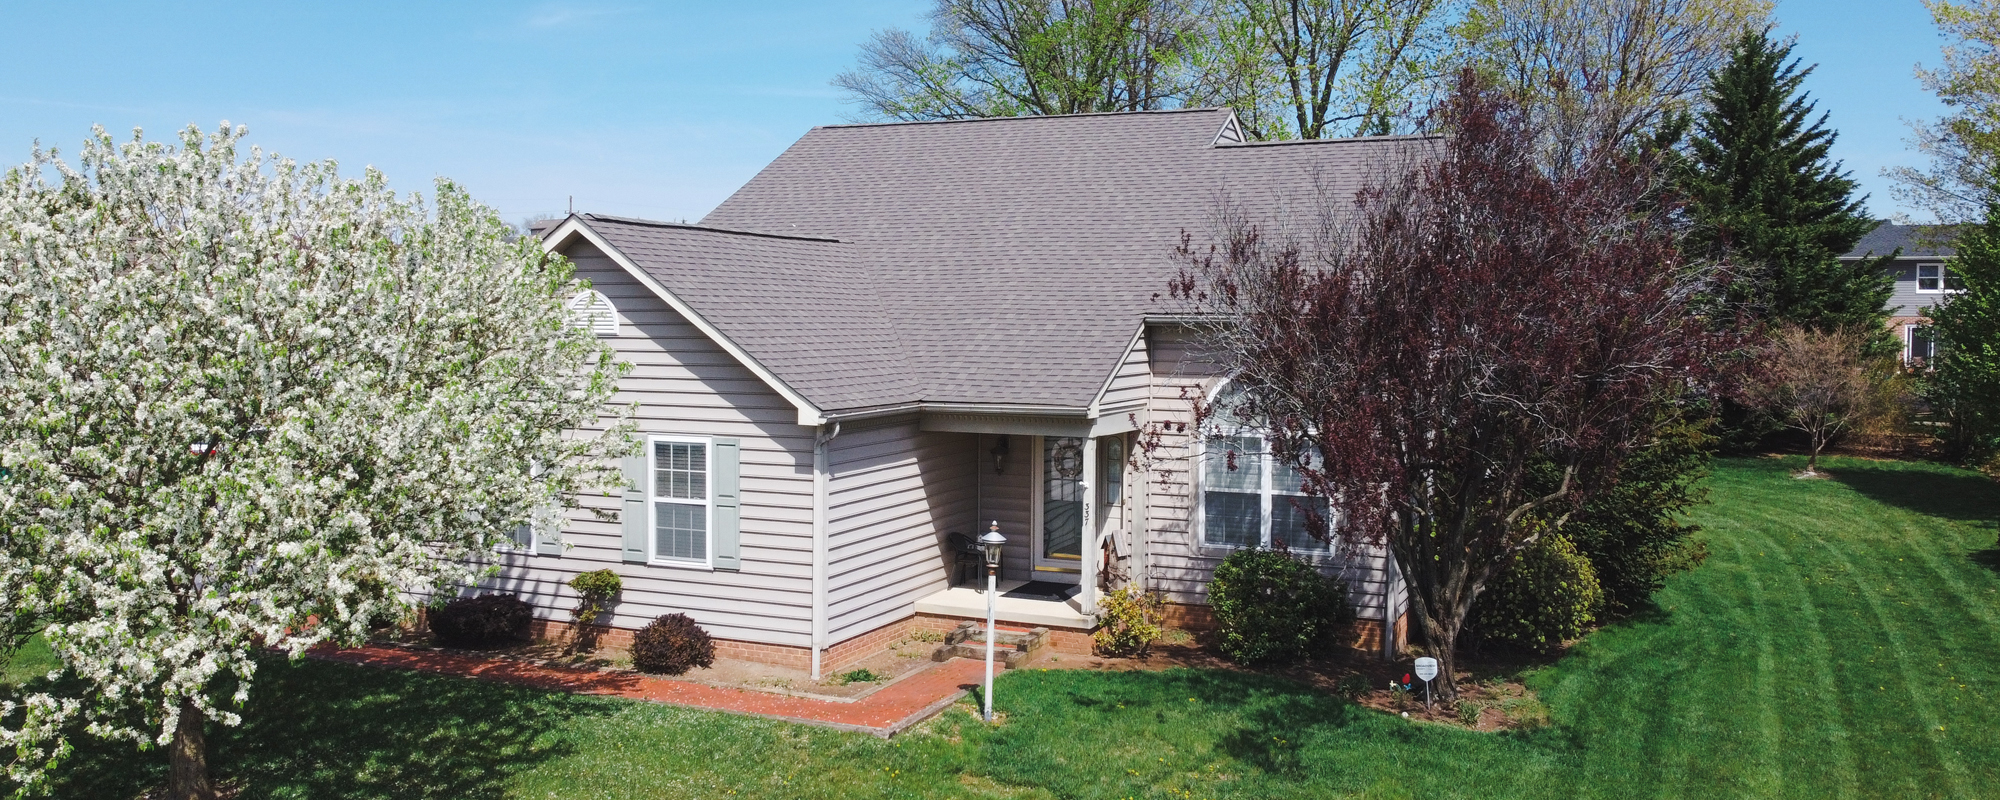 Roofing Services in Greencastle, PA